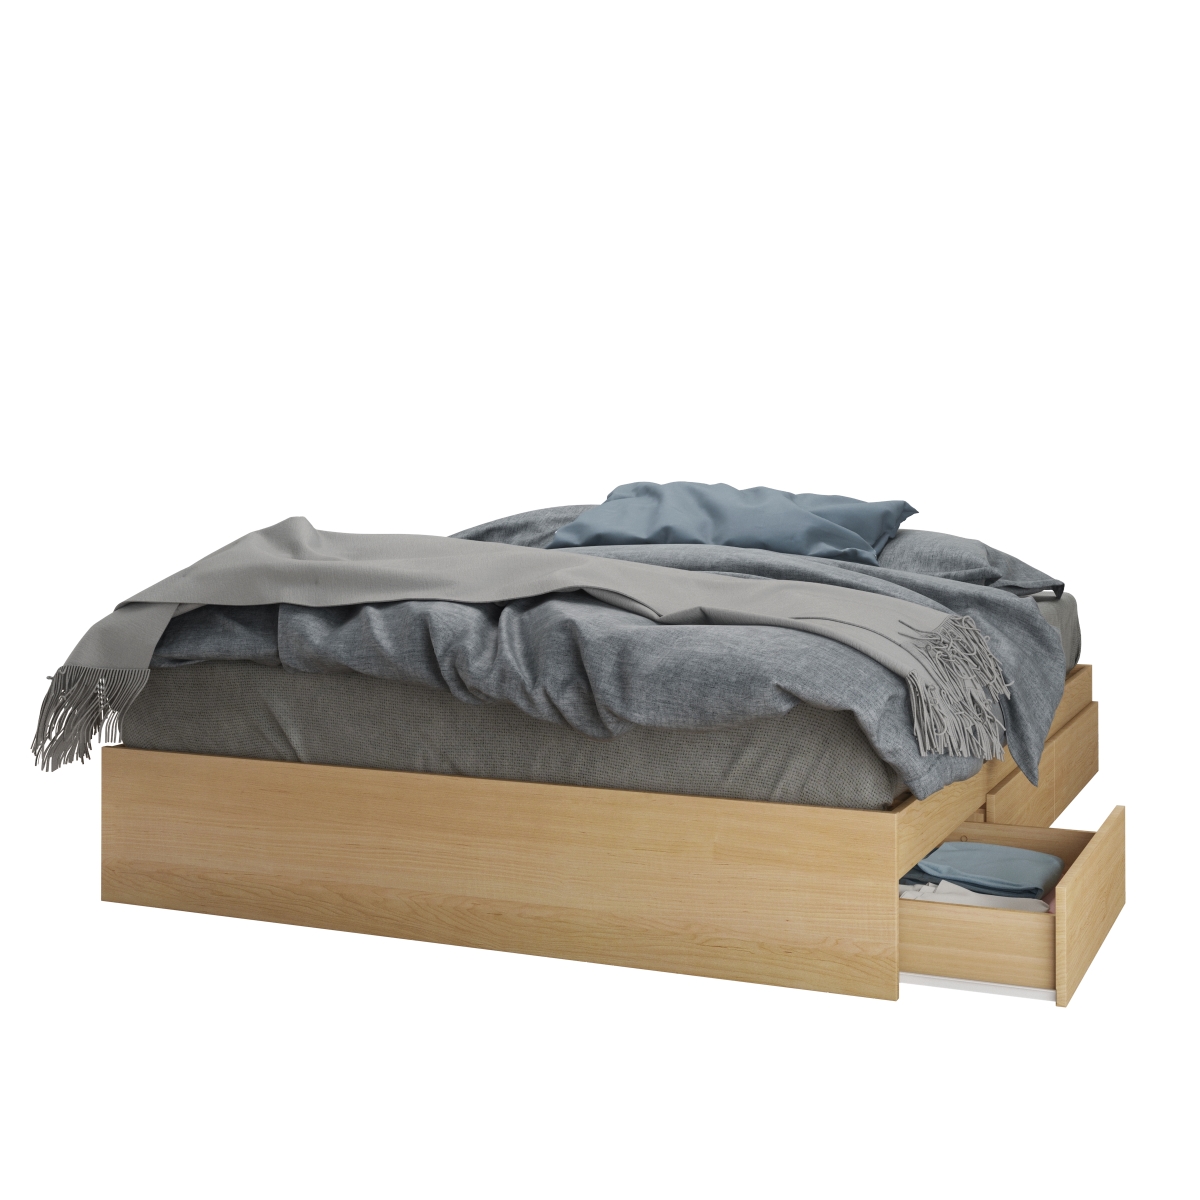 Nomad Complete Bed Kit, Natural Maple Laminate & White Matte Lacquer - Queen Size